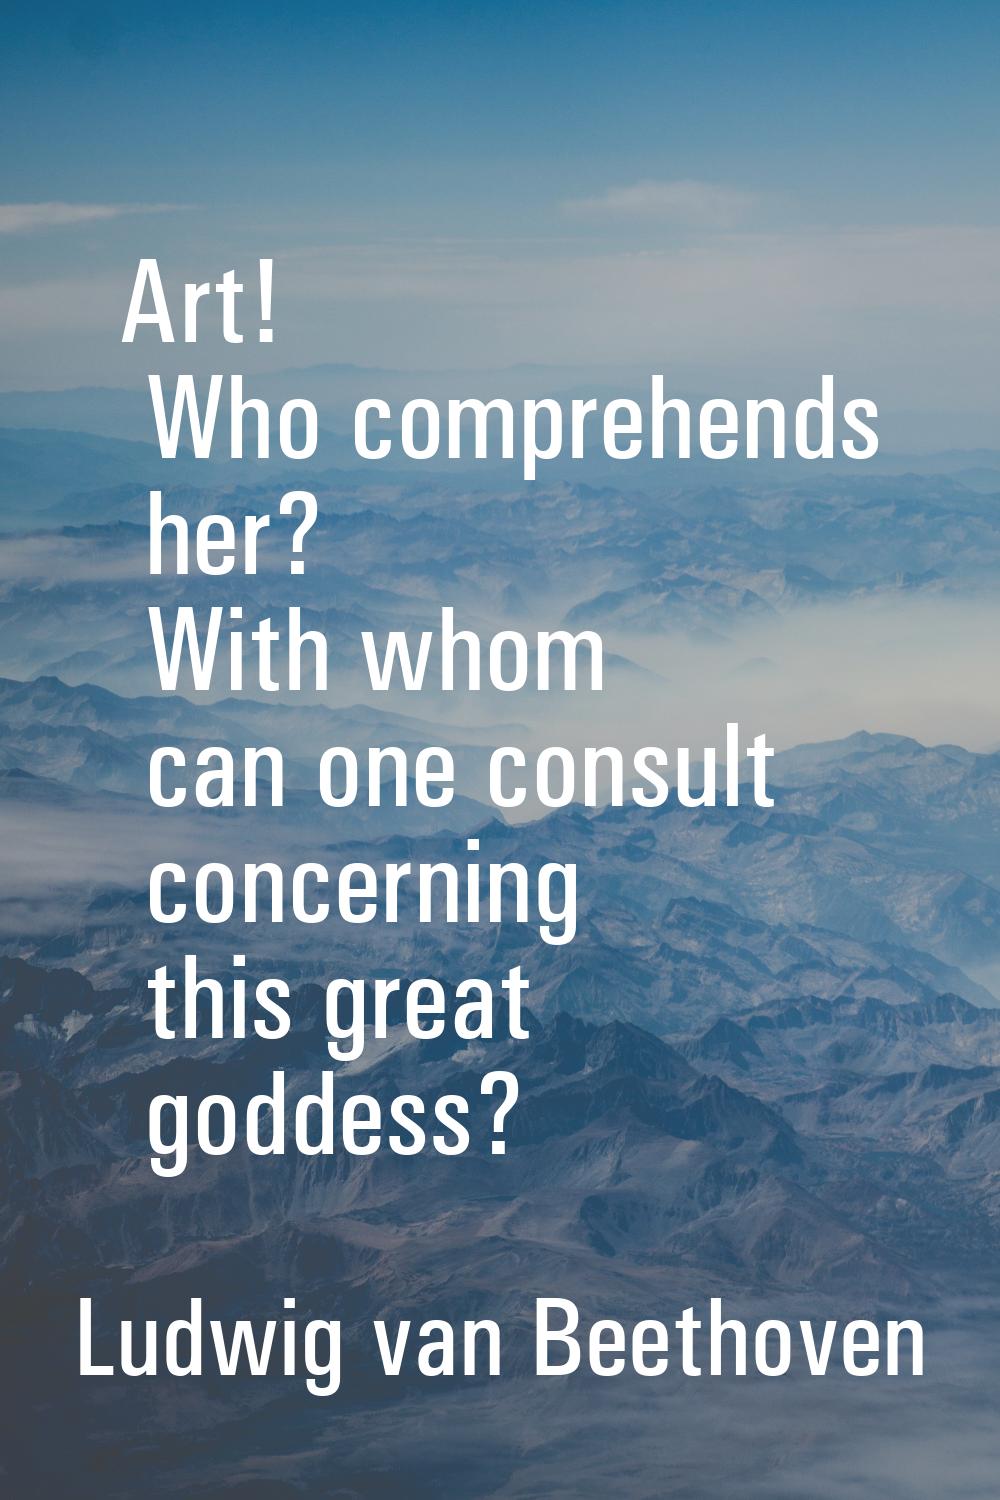 Art! Who comprehends her? With whom can one consult concerning this great goddess?